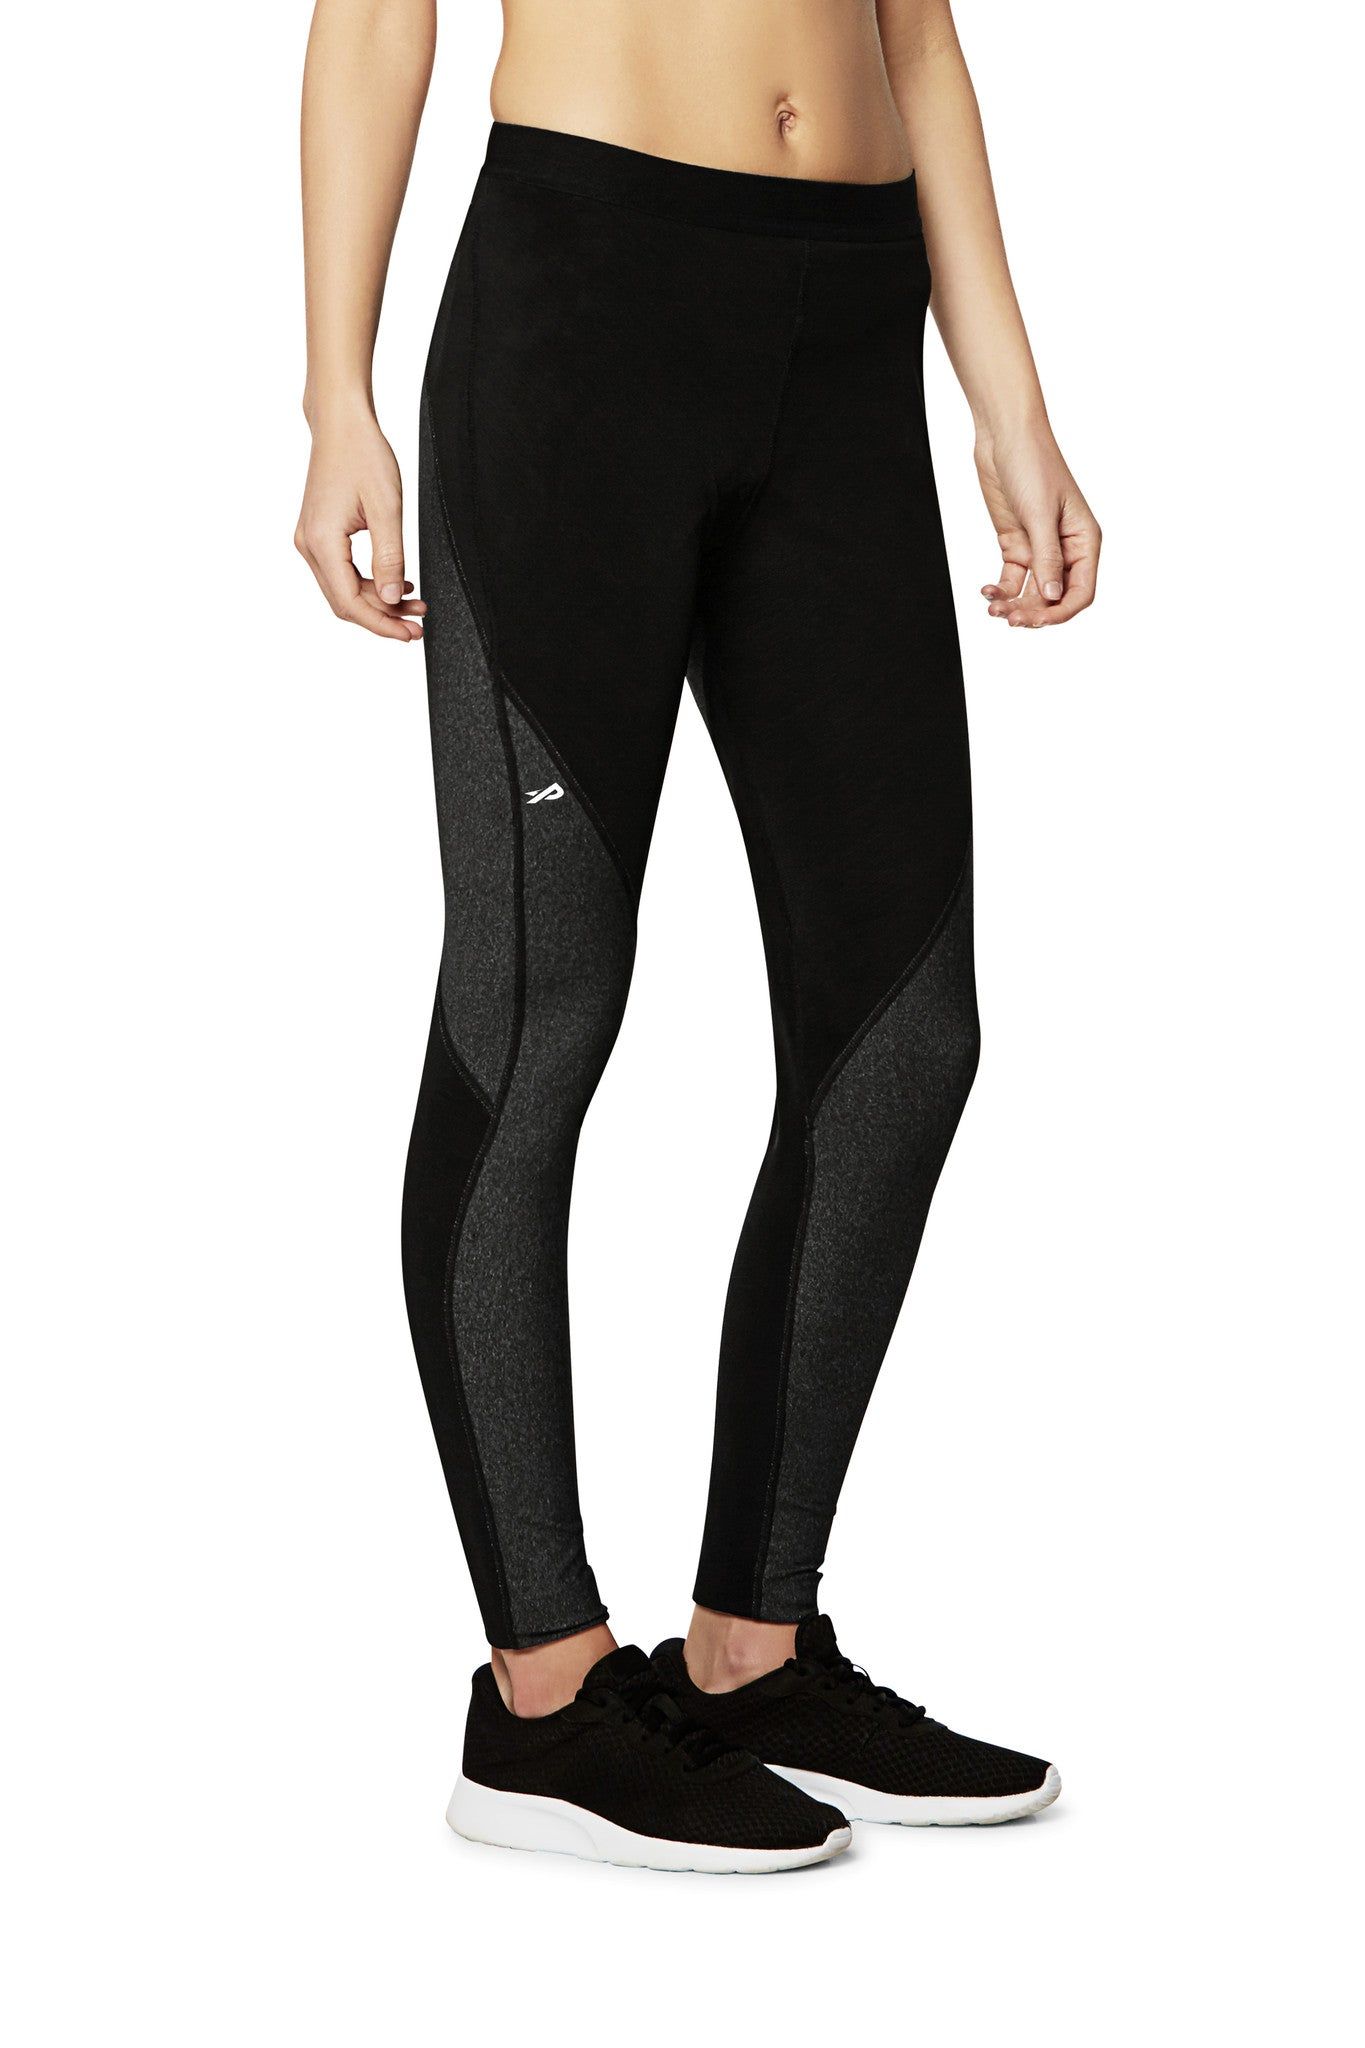 Buy Active Research Women s Compression Pants - Best Leggings for Running  Yoga Crossfit Training Fitness - Full-Length Athletic Tights w Hidden  Pocket Black Medium at